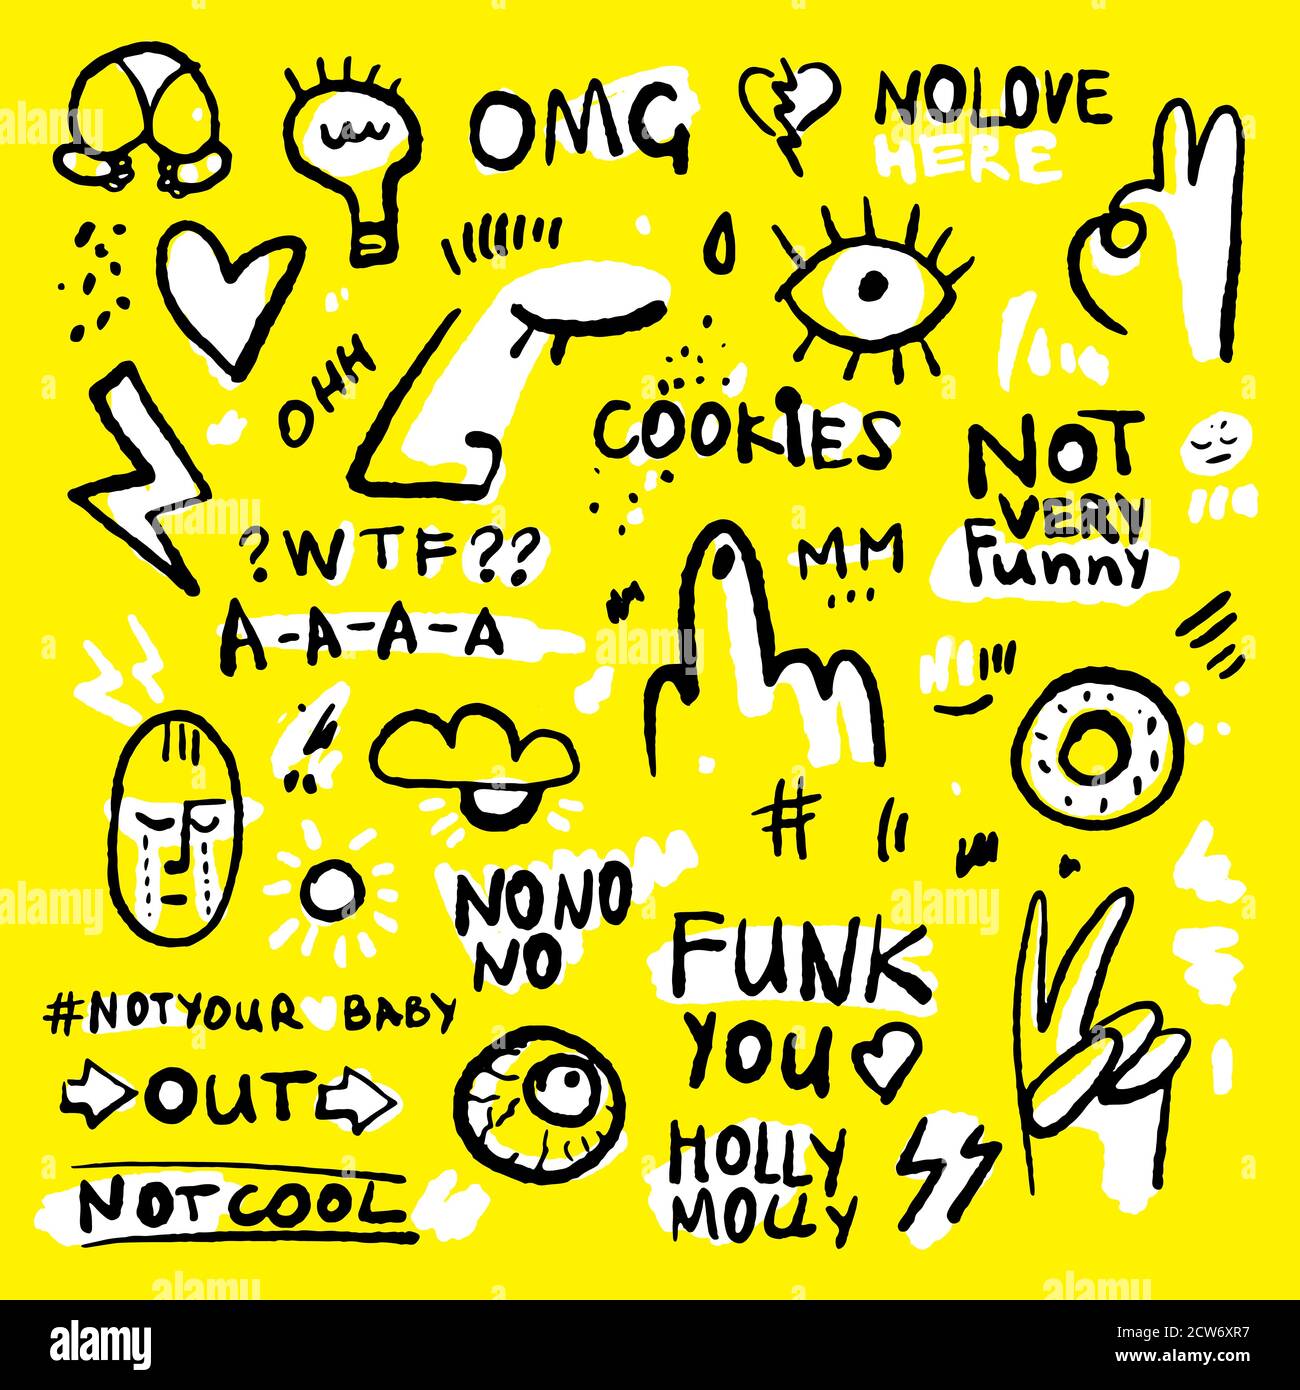 Positive and funny doodle sticker set in black, yellow and white colors. Hand drawn stickers with donut, eye, hearts, lettering and human face. Ink Stock Vector